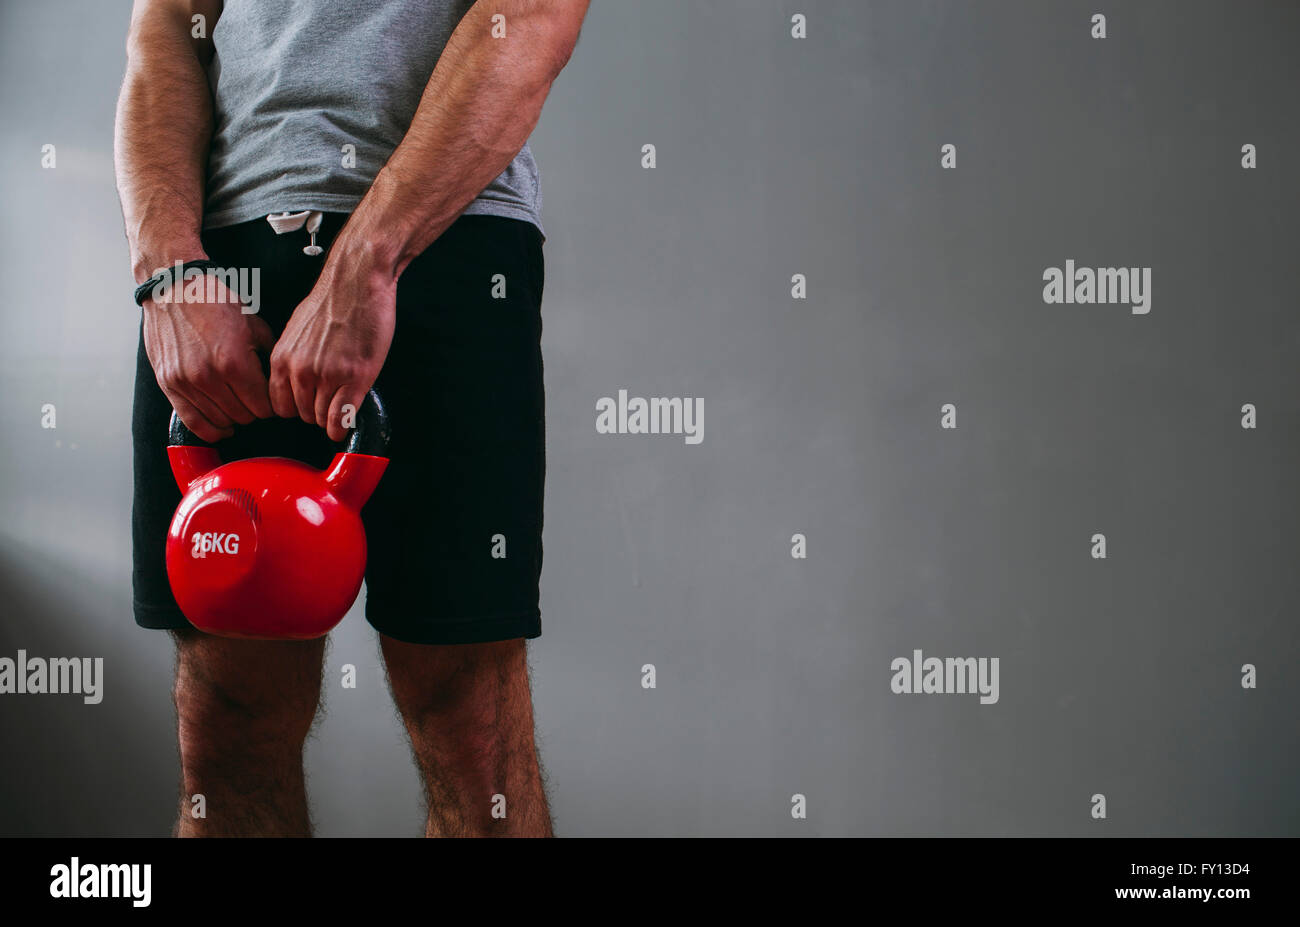 Portrait man lifting kettlebell at gym Banque D'Images